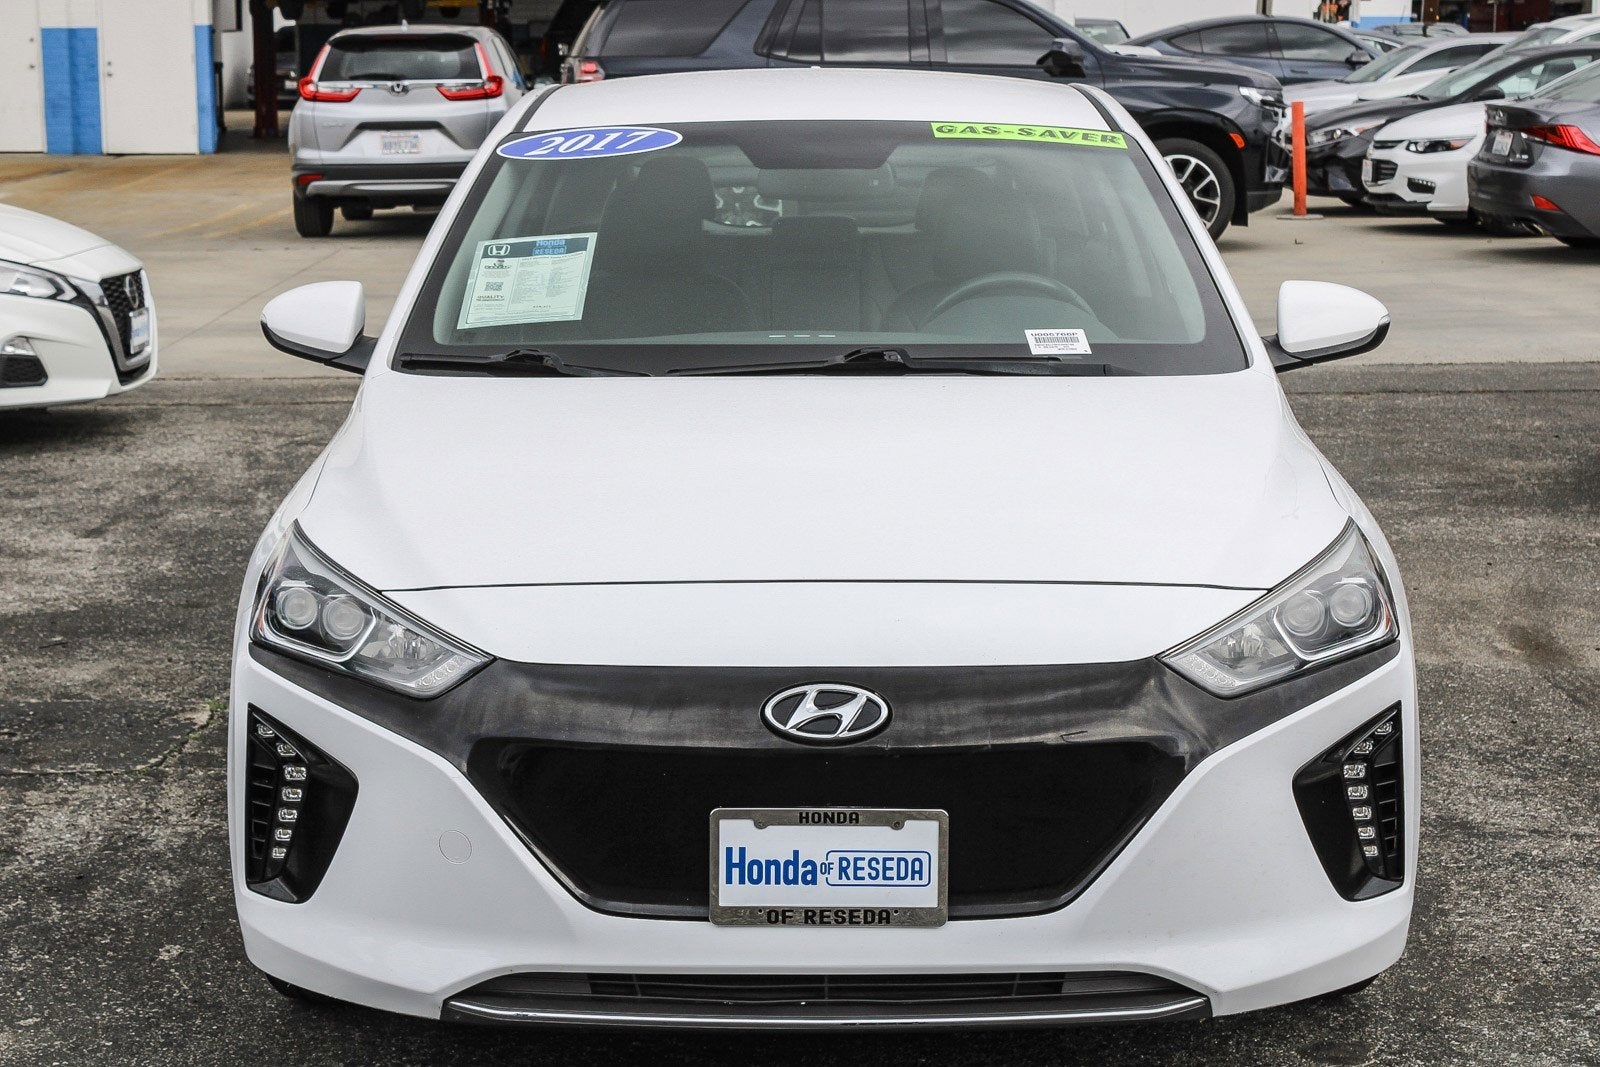 Used 2017 Hyundai Ioniq Limited with VIN KMHC85LH9HU005766 for sale in Reseda, CA